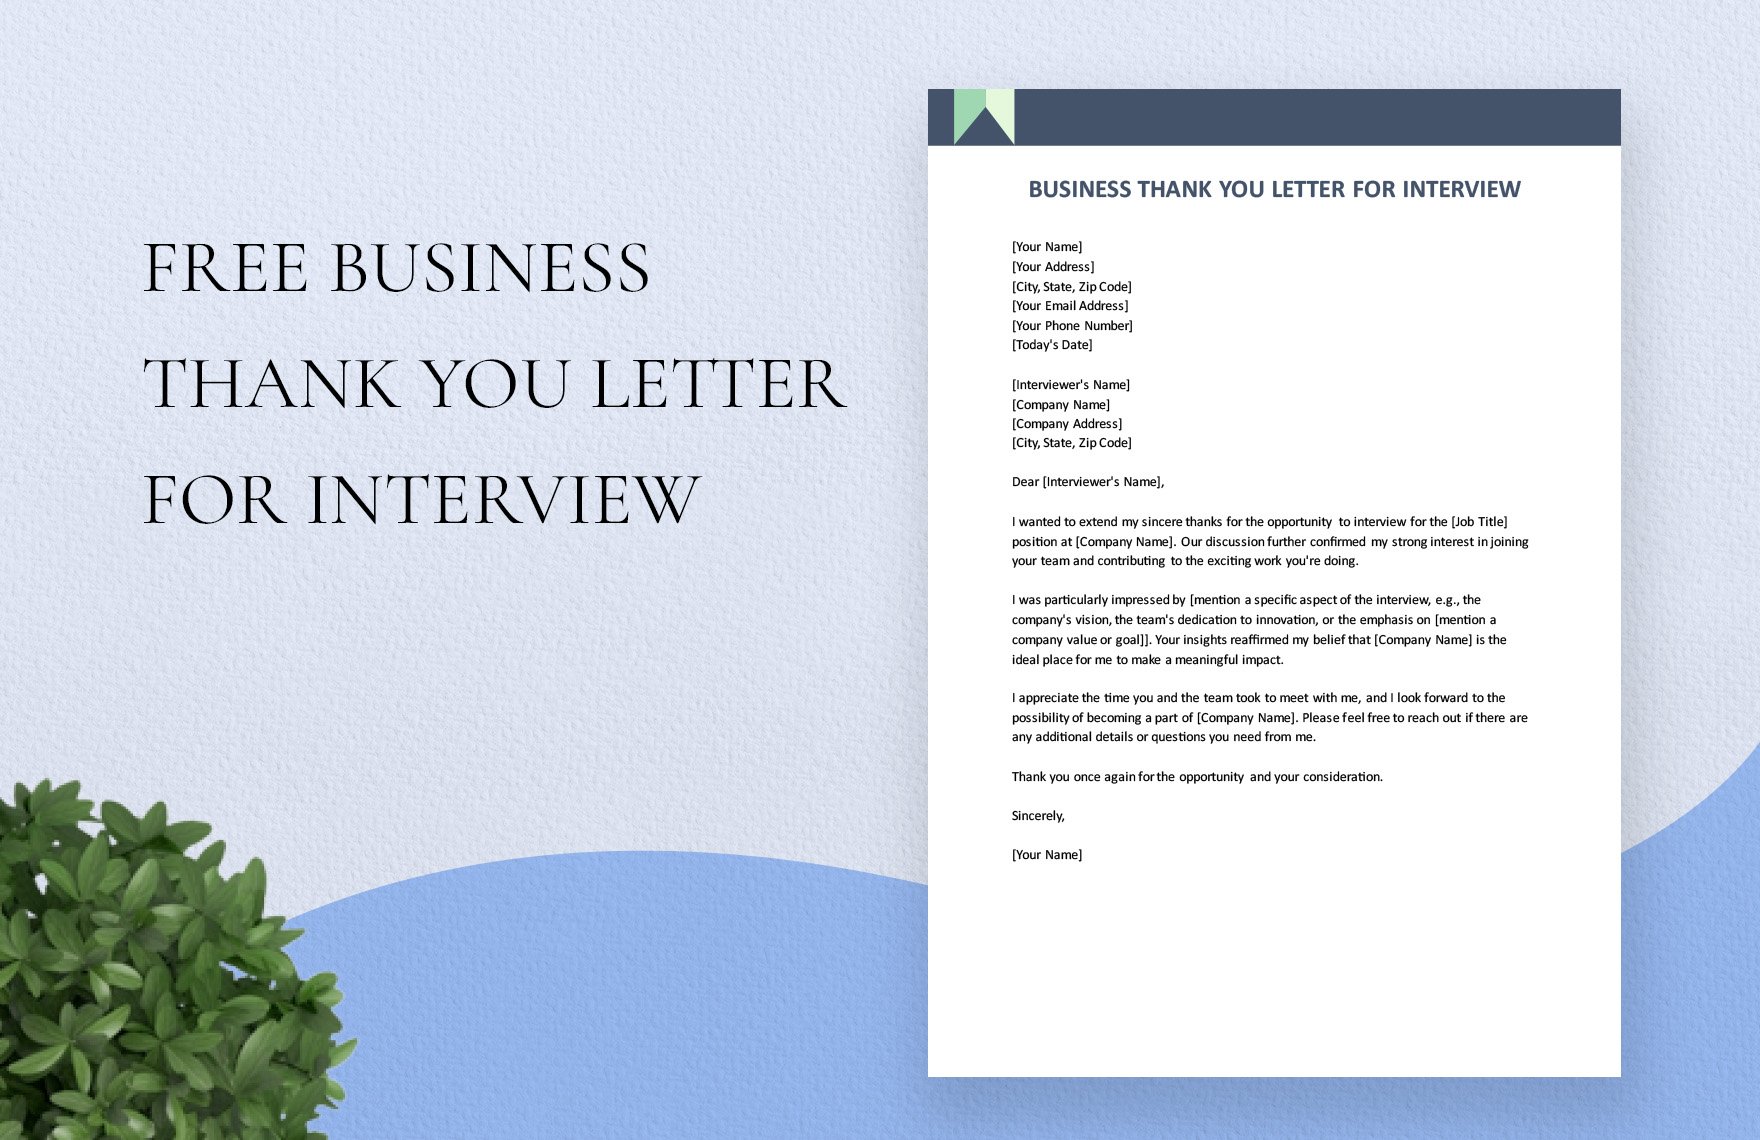 business-thank-you-letter-for-interview-template